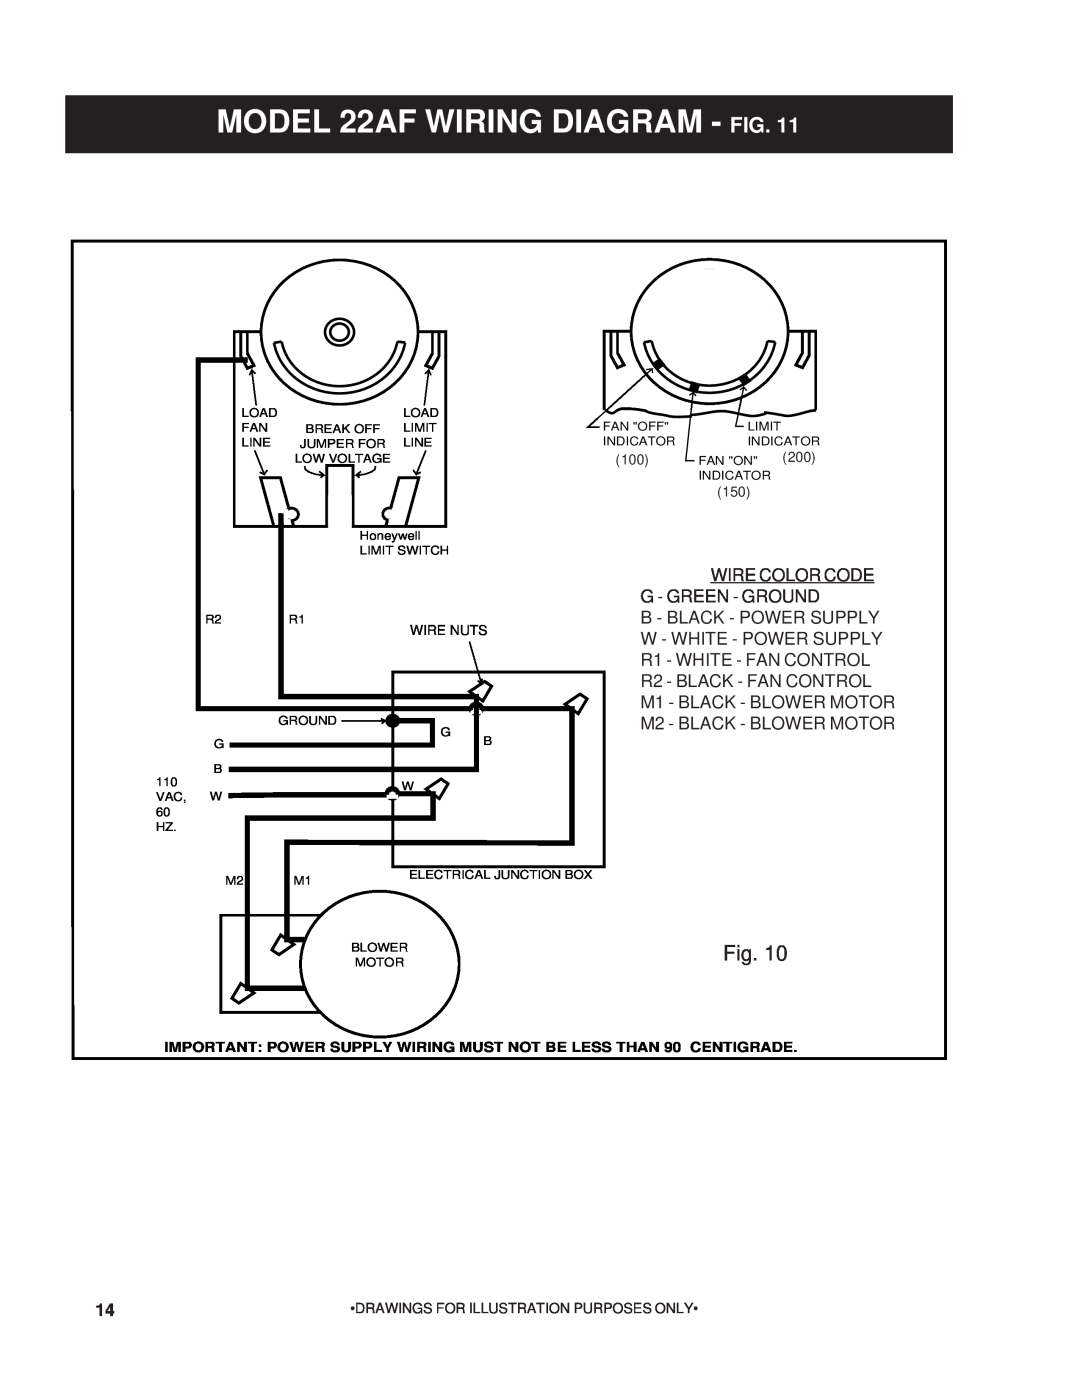 United States Stove MODEL 22AF WIRING DIAGRAM - FIG, Wire Color Code, G- Green- Ground, R1- WHITE- FAN CONTROL 